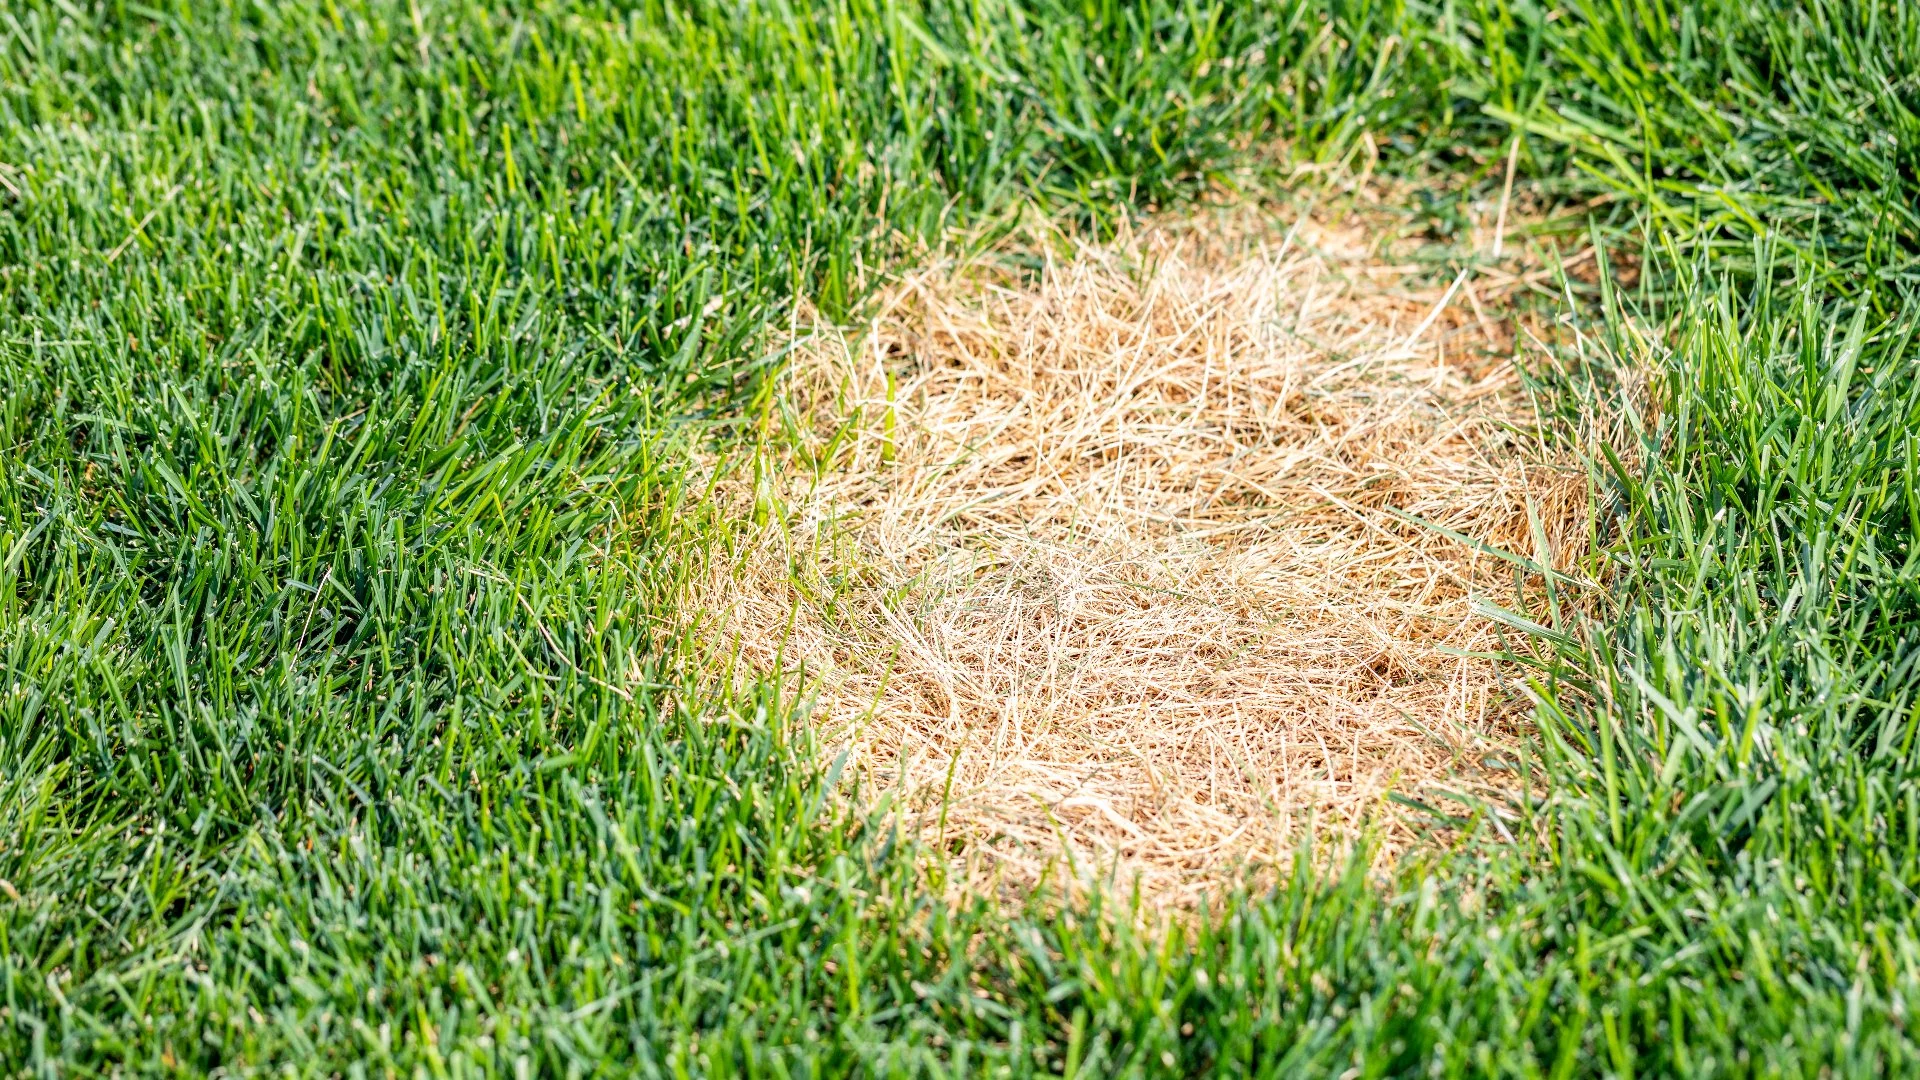 Protect Your Lawn From Turf Diseases With These Steps